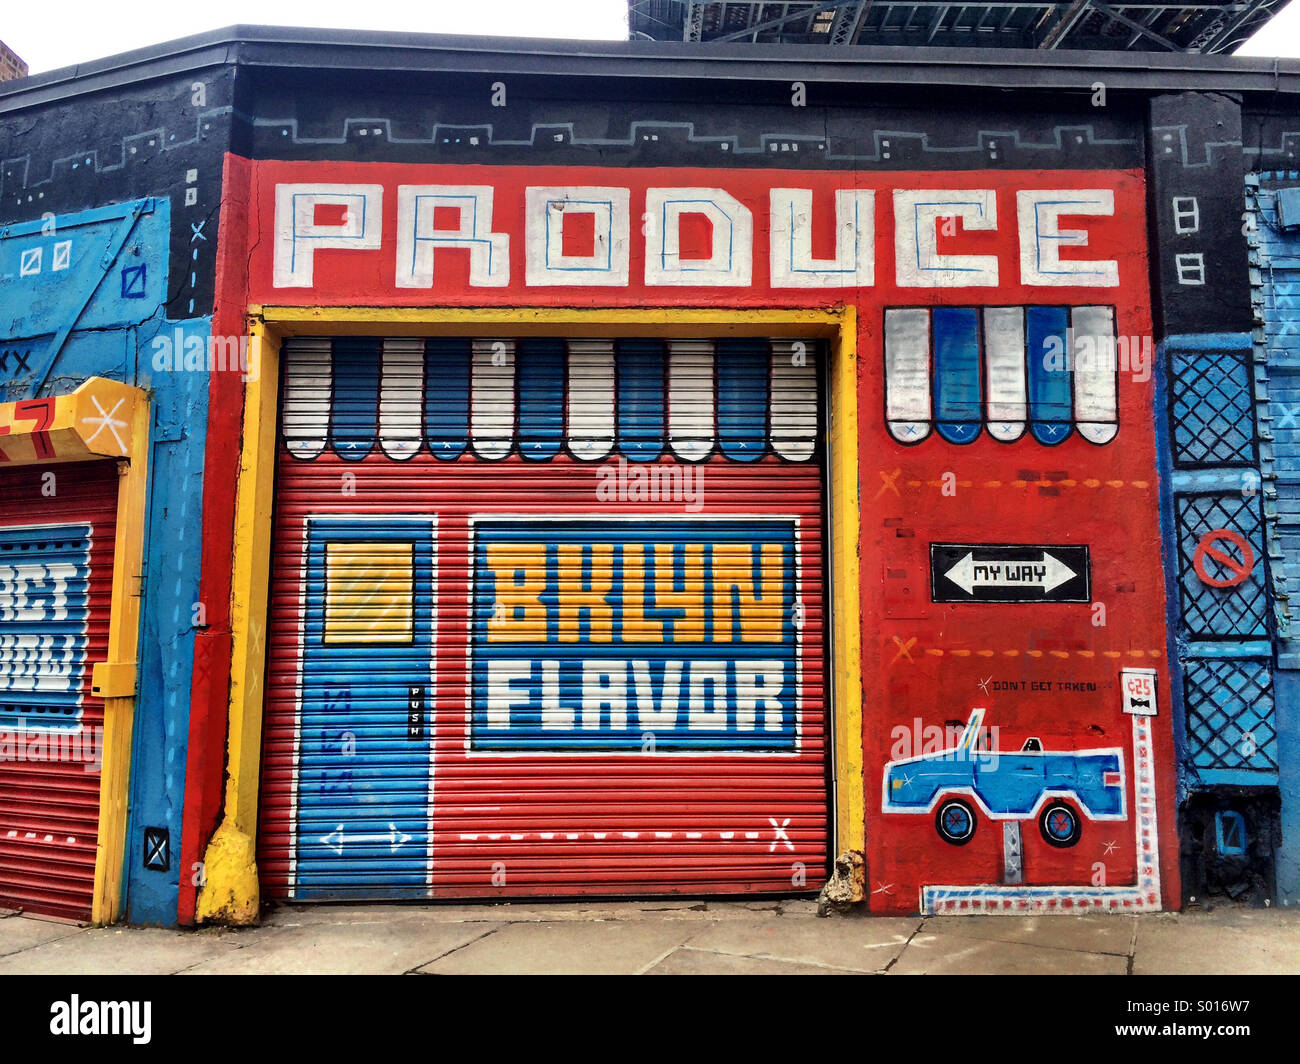 A building painted to look like a produce store in the DUMBO neighborhood of Brooklyn, New York. Stock Photo